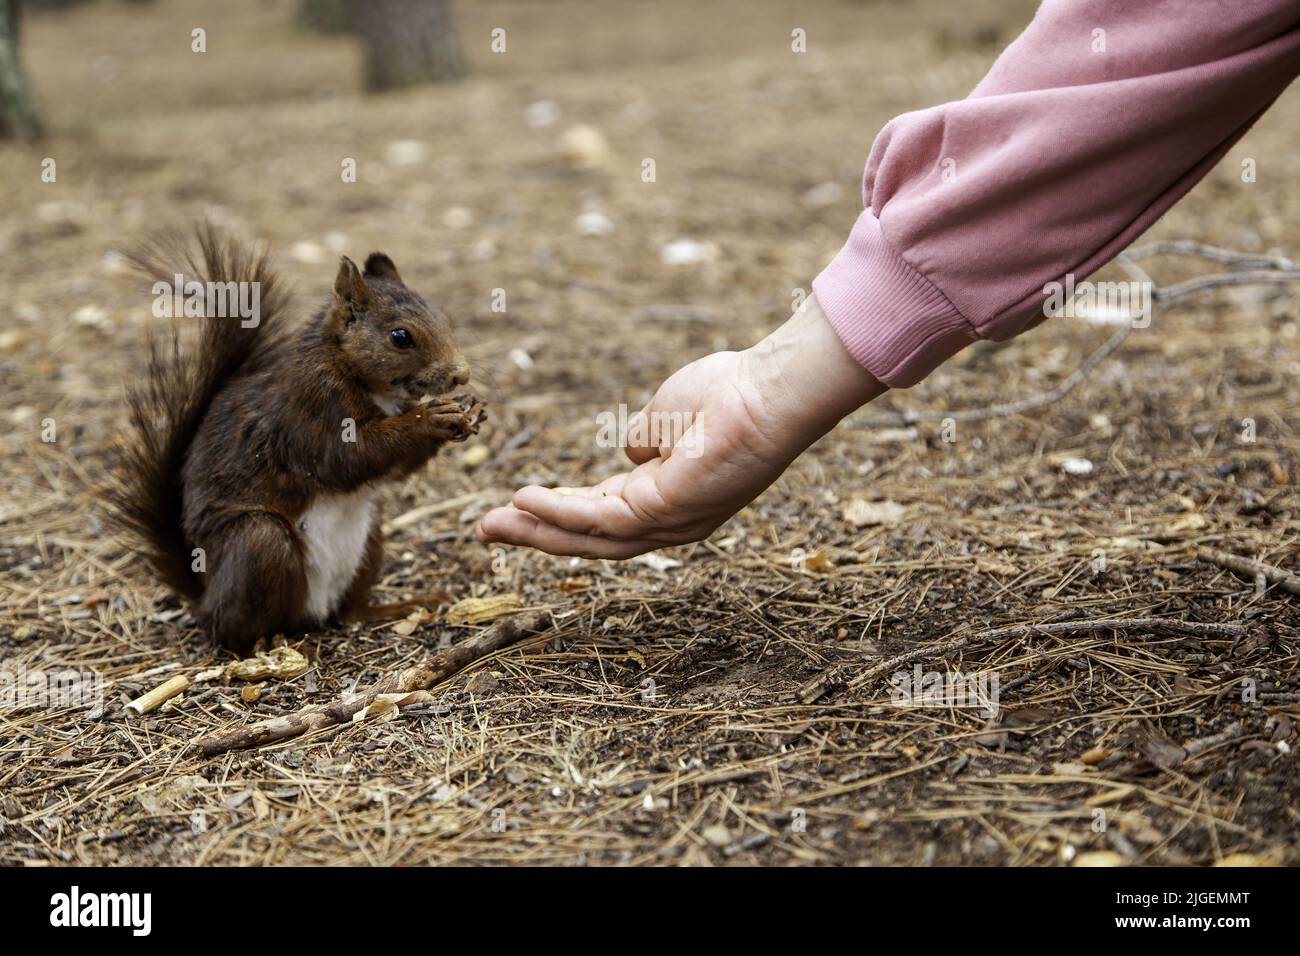 Feeding a wild animal in the forest, animal and nature care Stock Photo